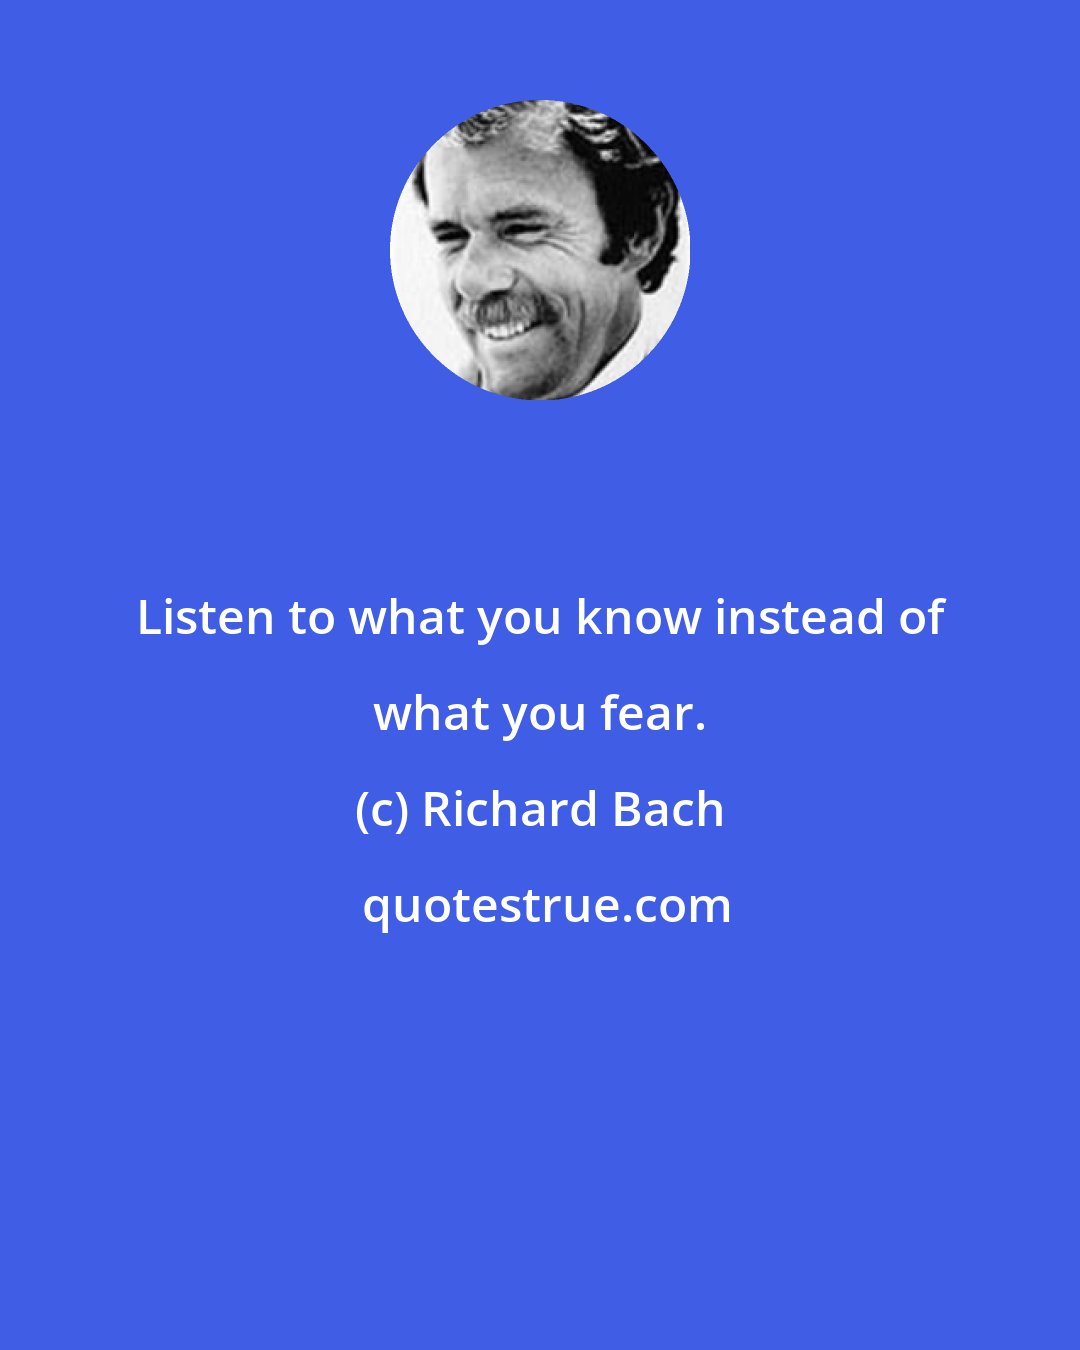 Richard Bach: Listen to what you know instead of what you fear.